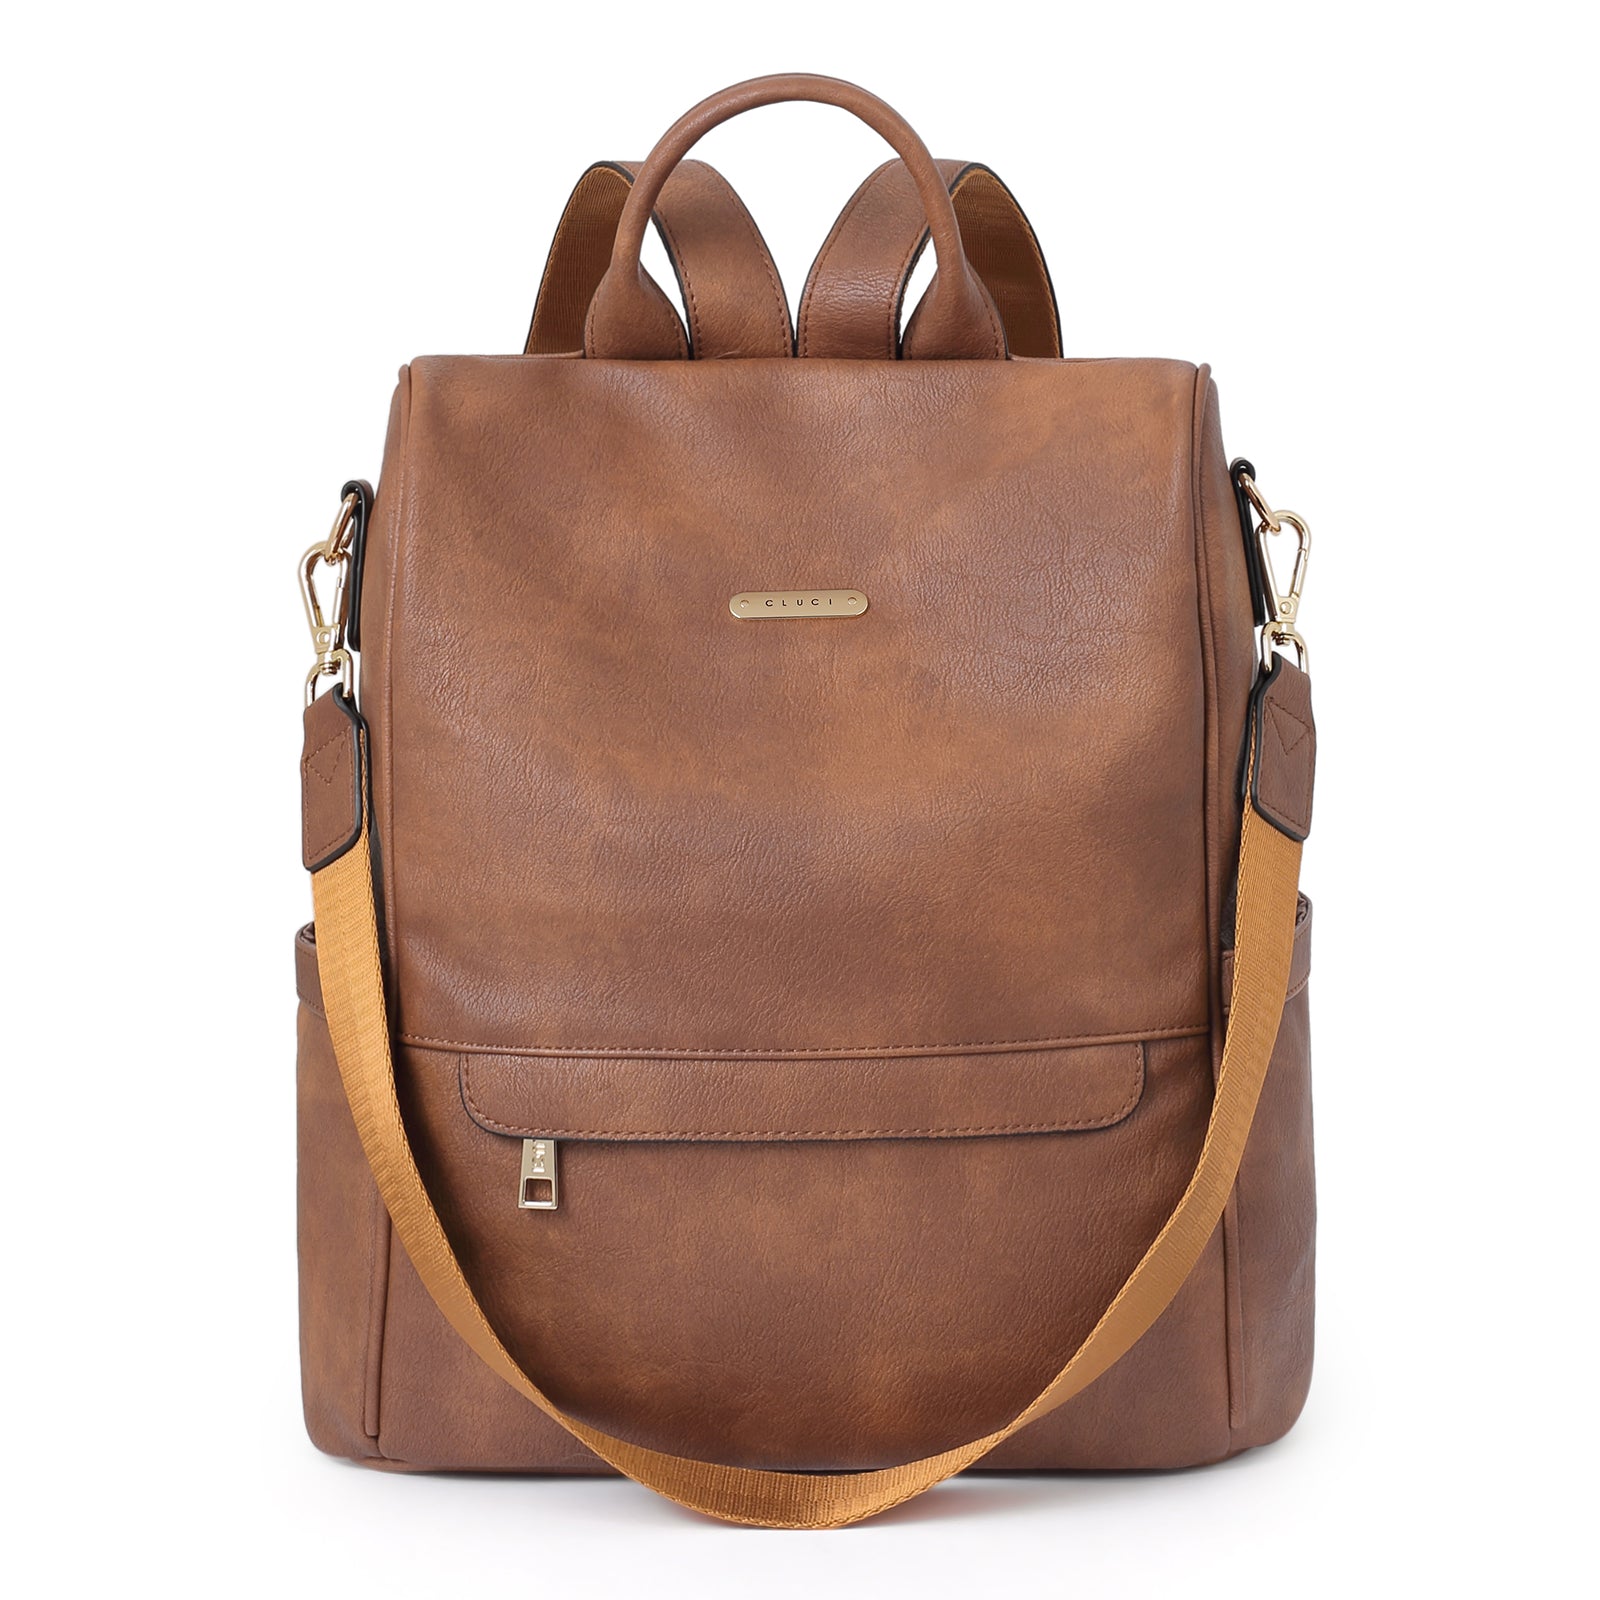 Greene Multi-Purpose Carry Way Vegan Leather Backpack Purse For Women | Two-Toned Vintage